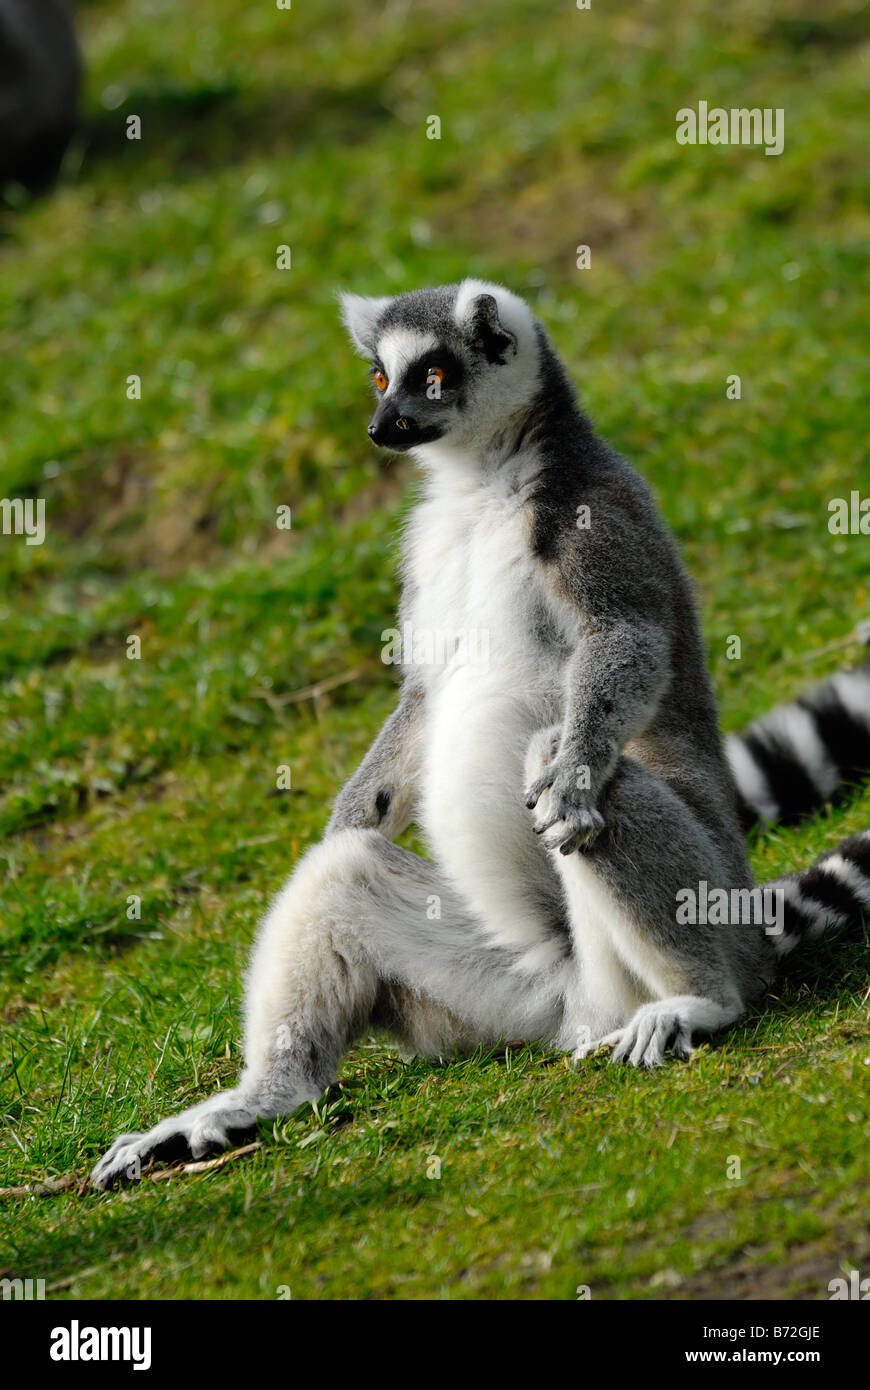 funny image of a ring tailed lemur Stock Photo